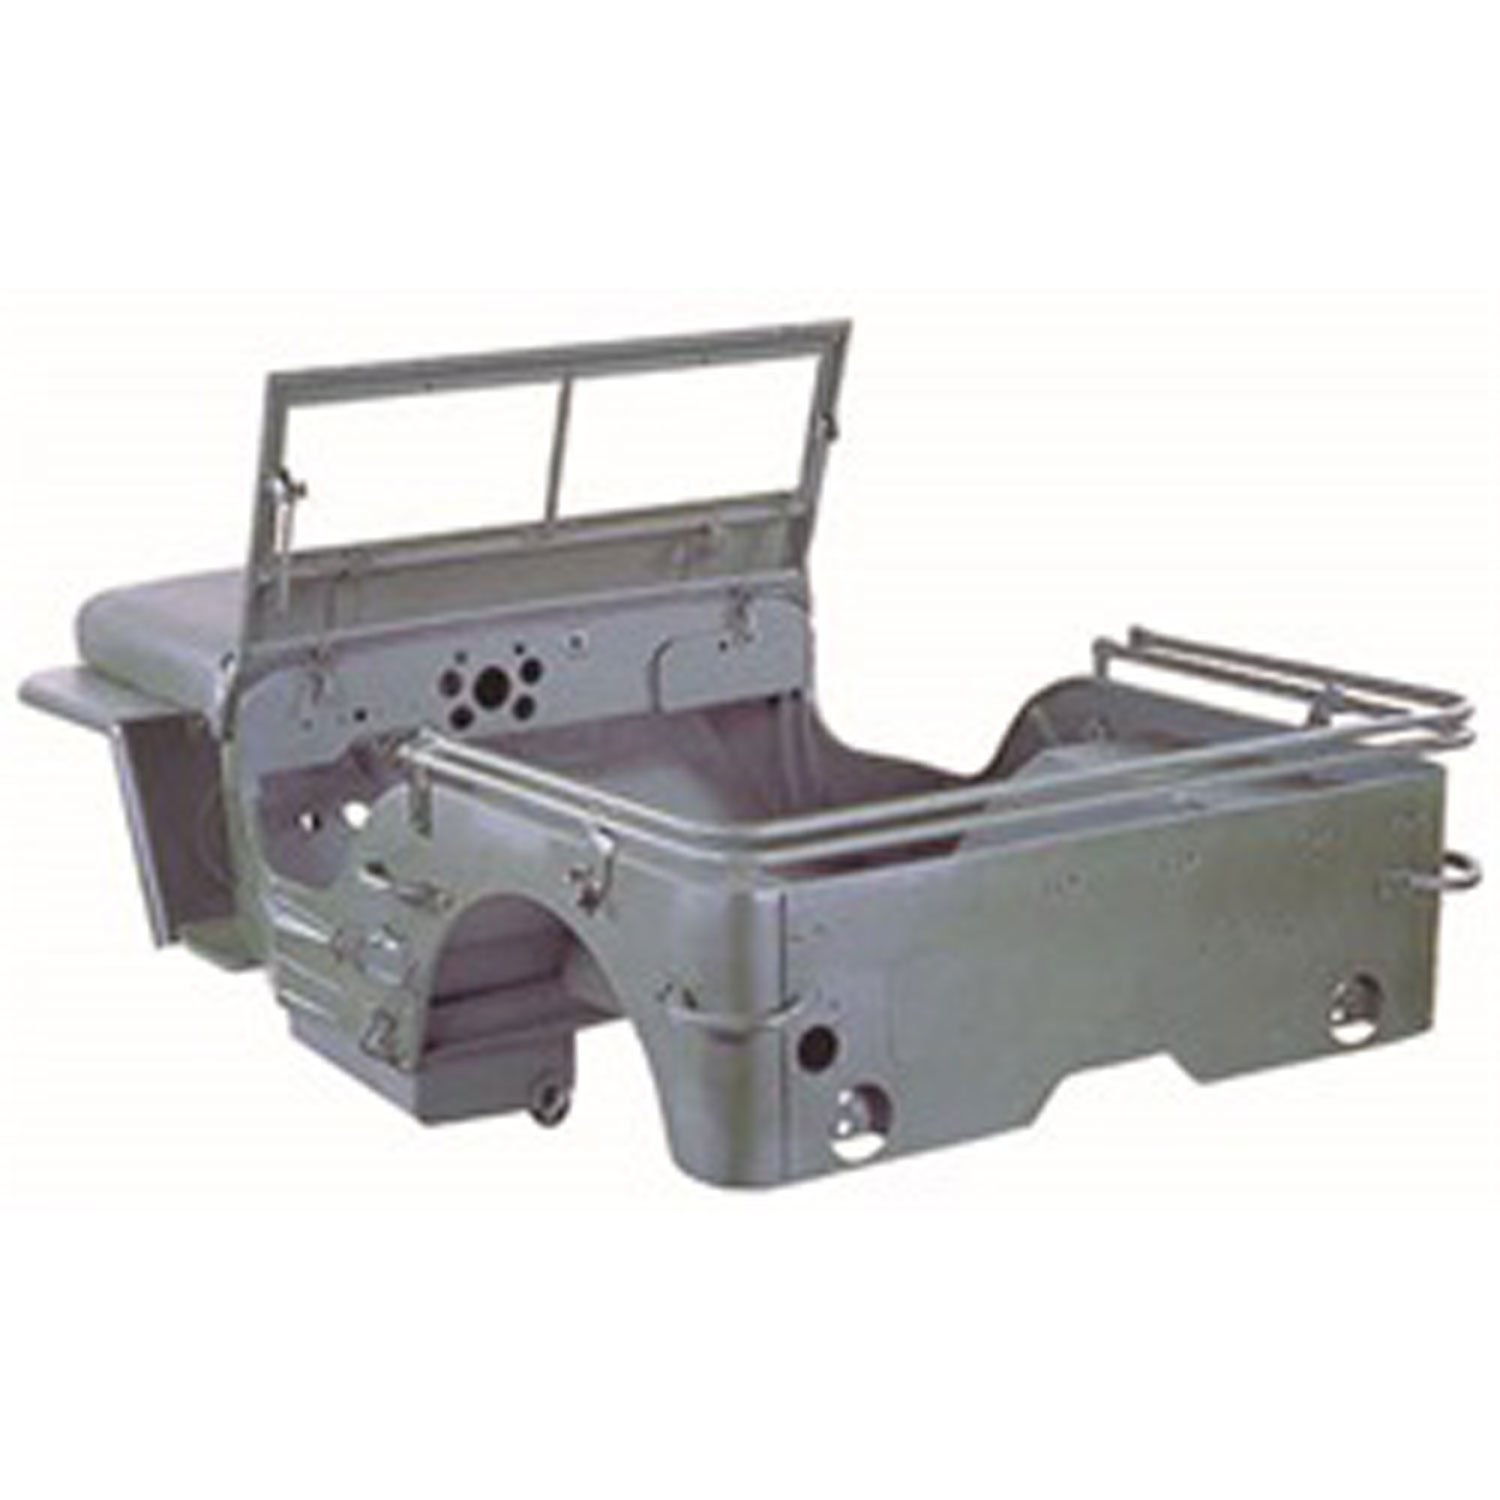 This Willys MB Master Kit from Omix-ADA restores Willys MB built between January 1944 to August 1945.